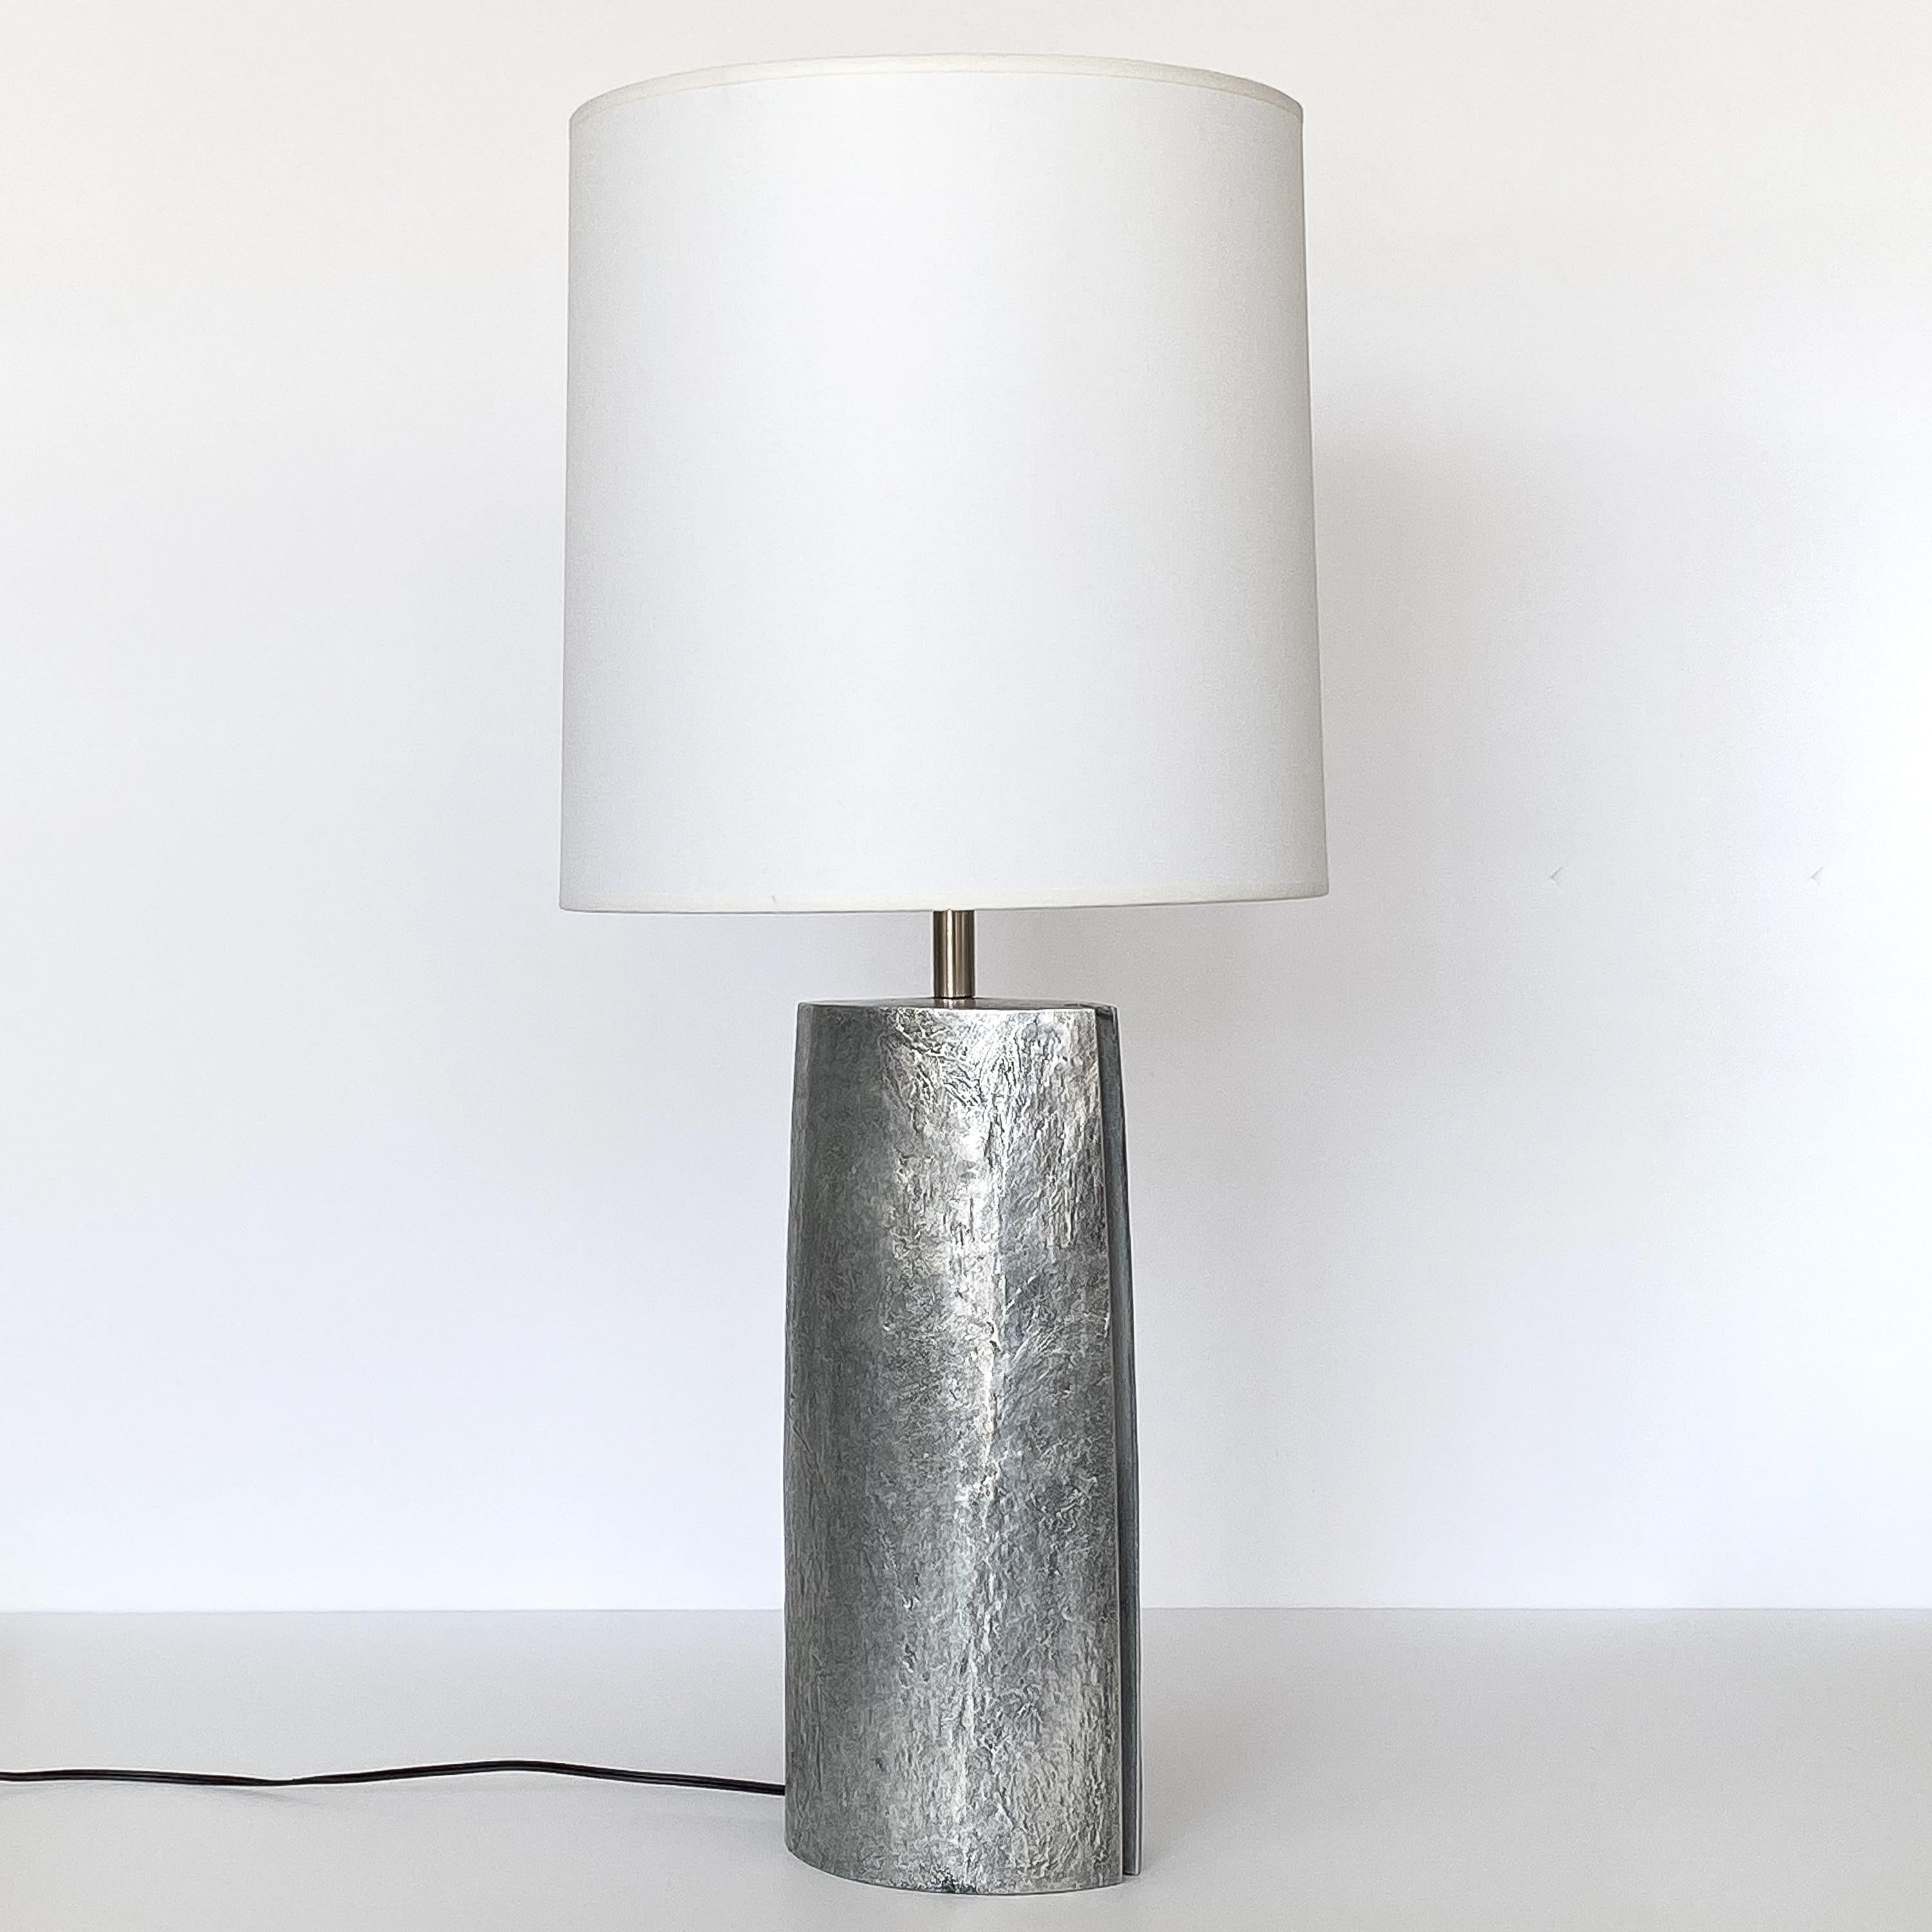 Italian Brutalist aluminum table lamp, circa 1970s. Monolithic in form, this table lamp features a solid cast aluminum body with textured finish. Marquise shape with routed details on both sides. Chrome cylinder finial and harp. Marked with the